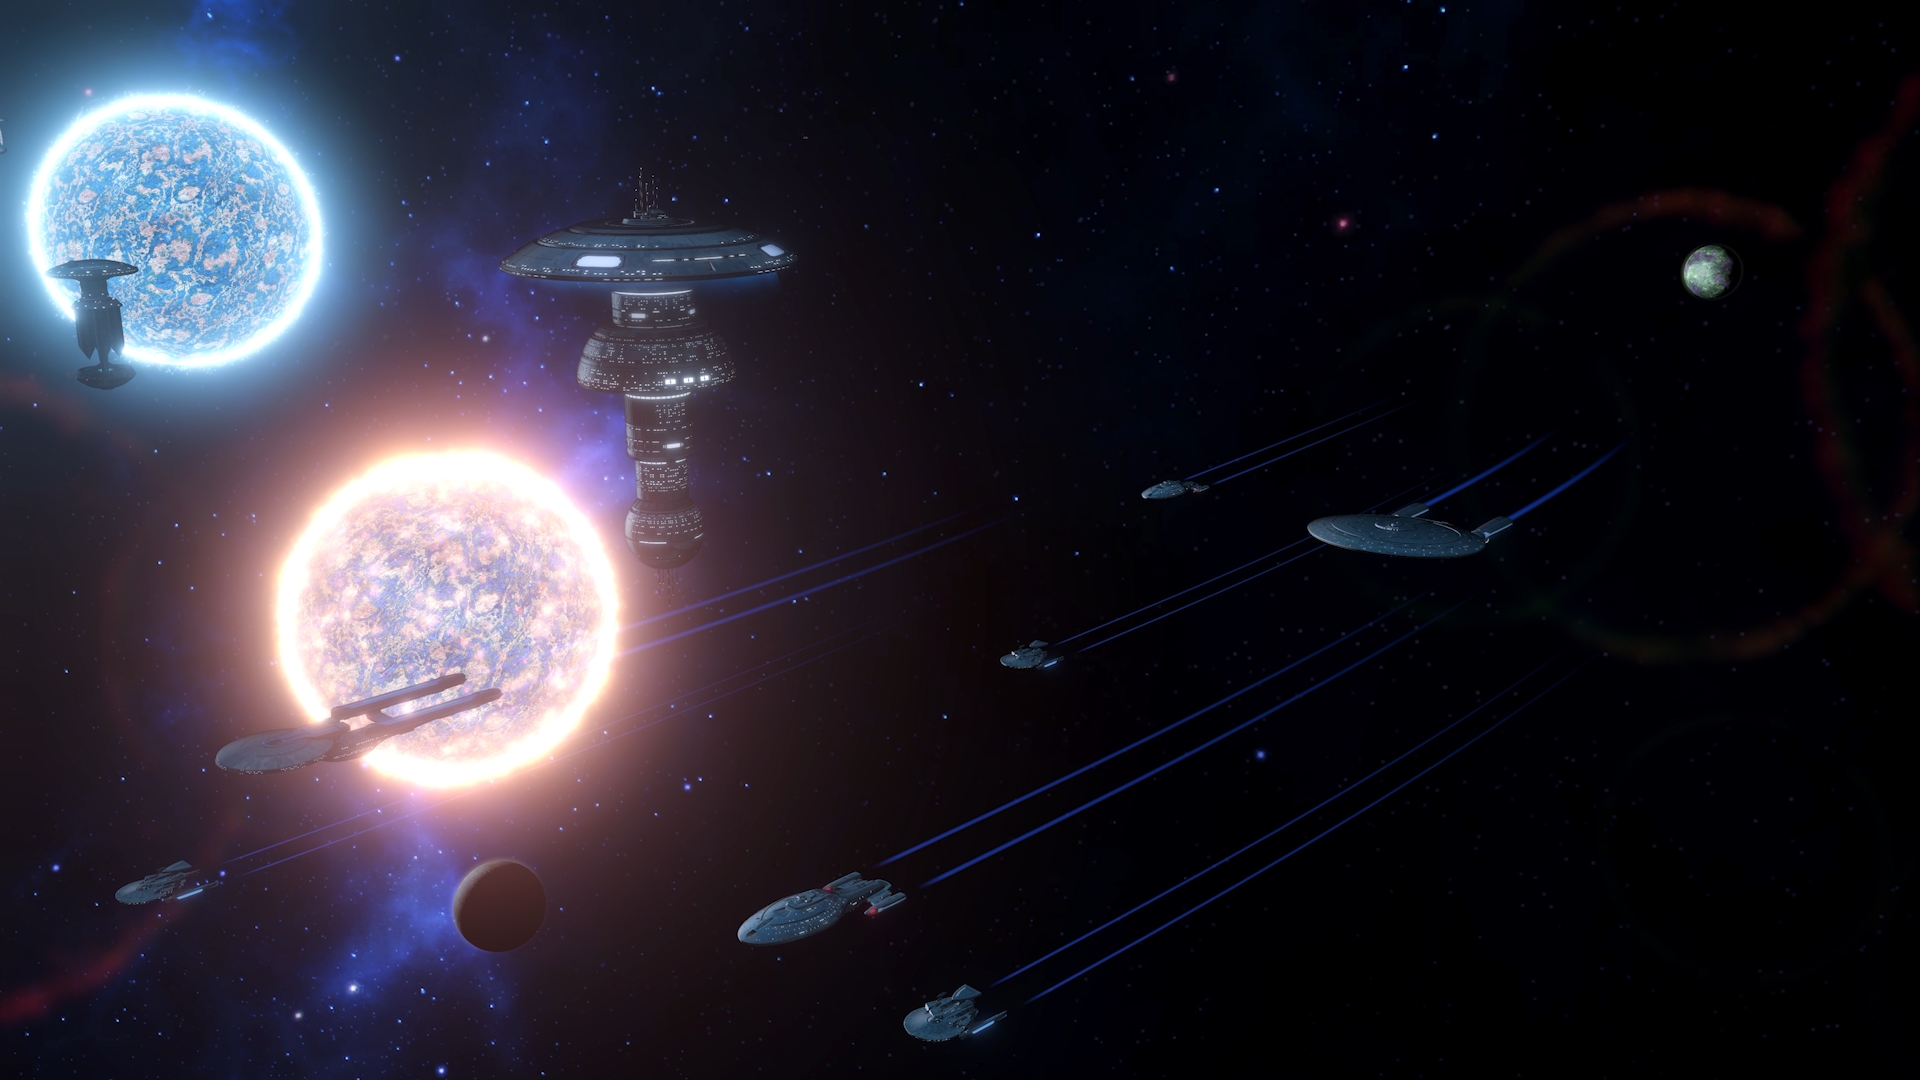 Several Federation ships pass through a binary star system, with multiple Federation starbases and resource extraction modules visible in the background.